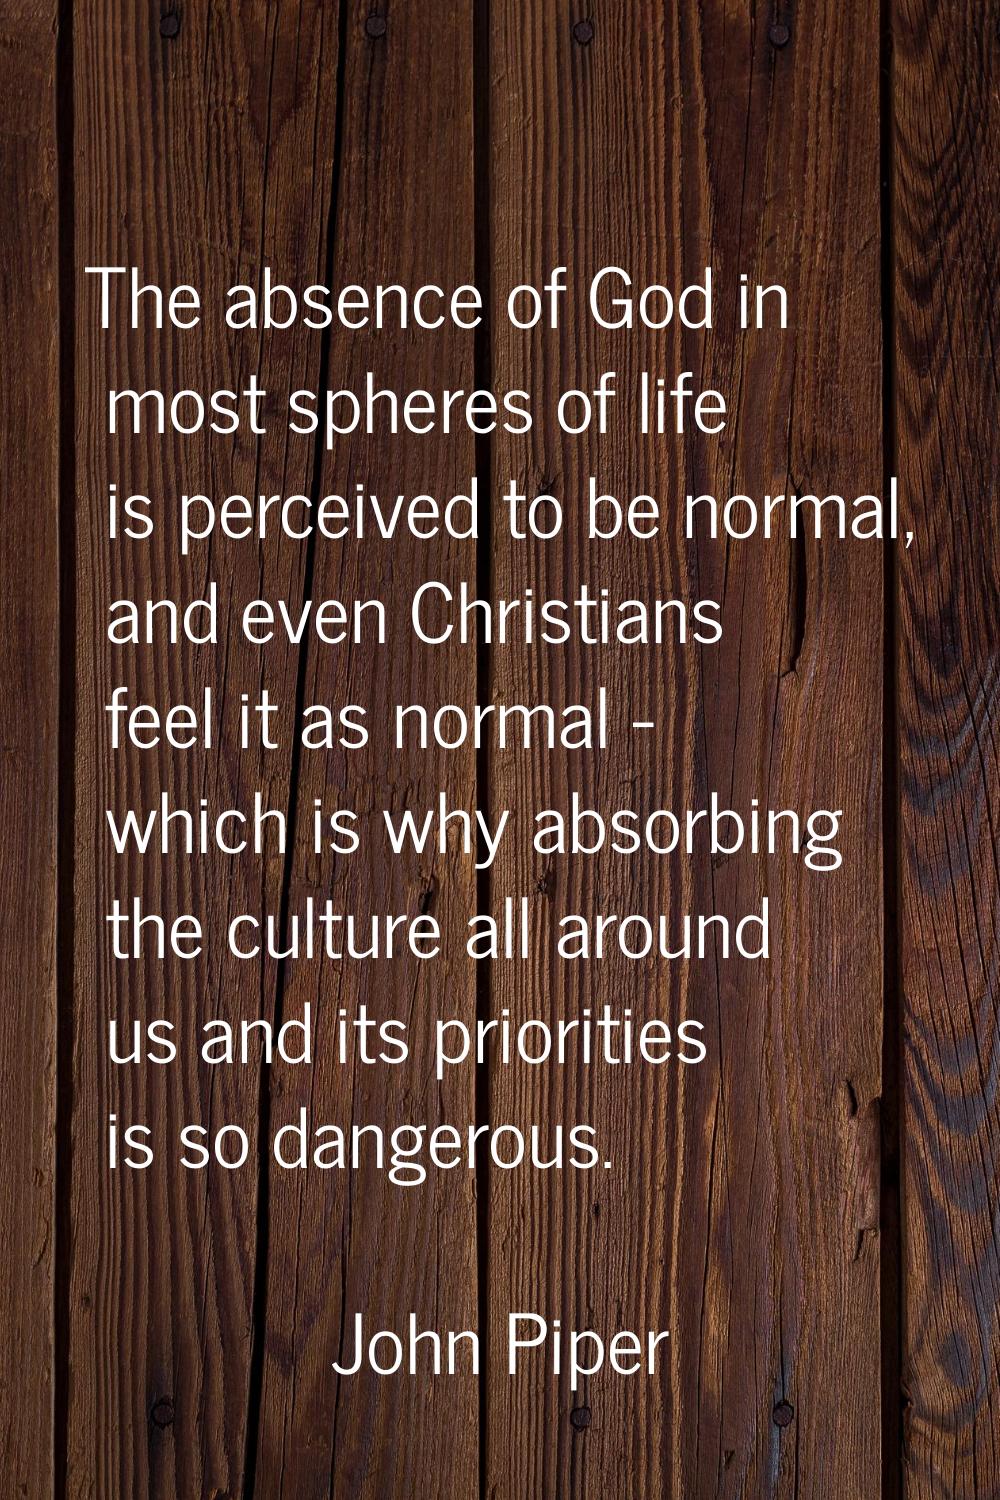 The absence of God in most spheres of life is perceived to be normal, and even Christians feel it a